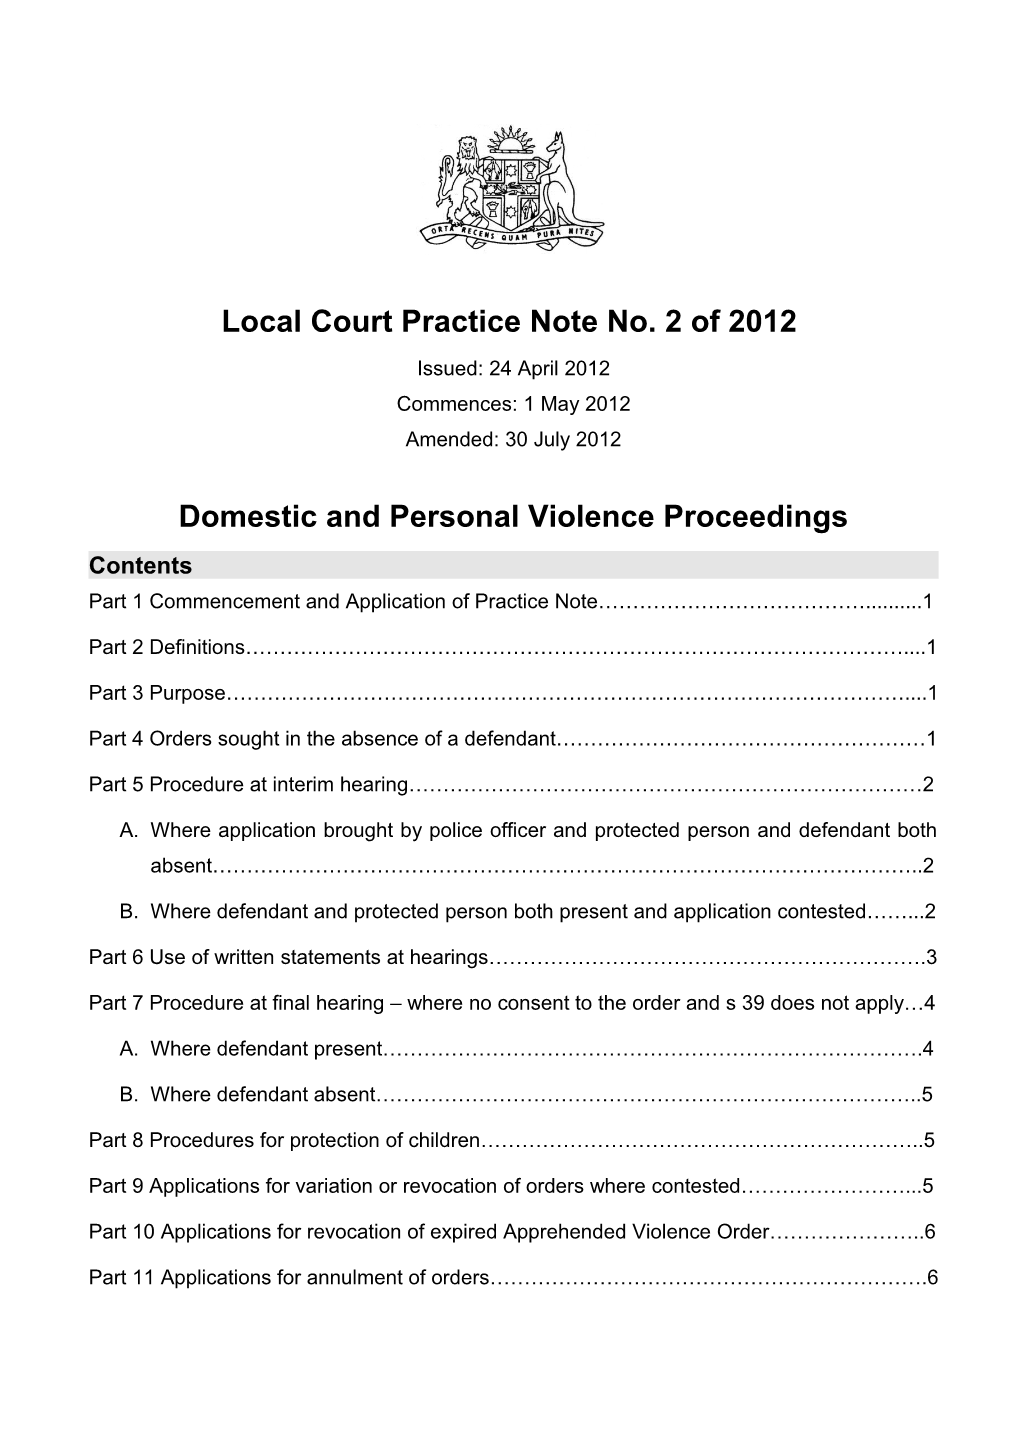 Practice Note 2 of 2012 - Domestic and Personal Voilence